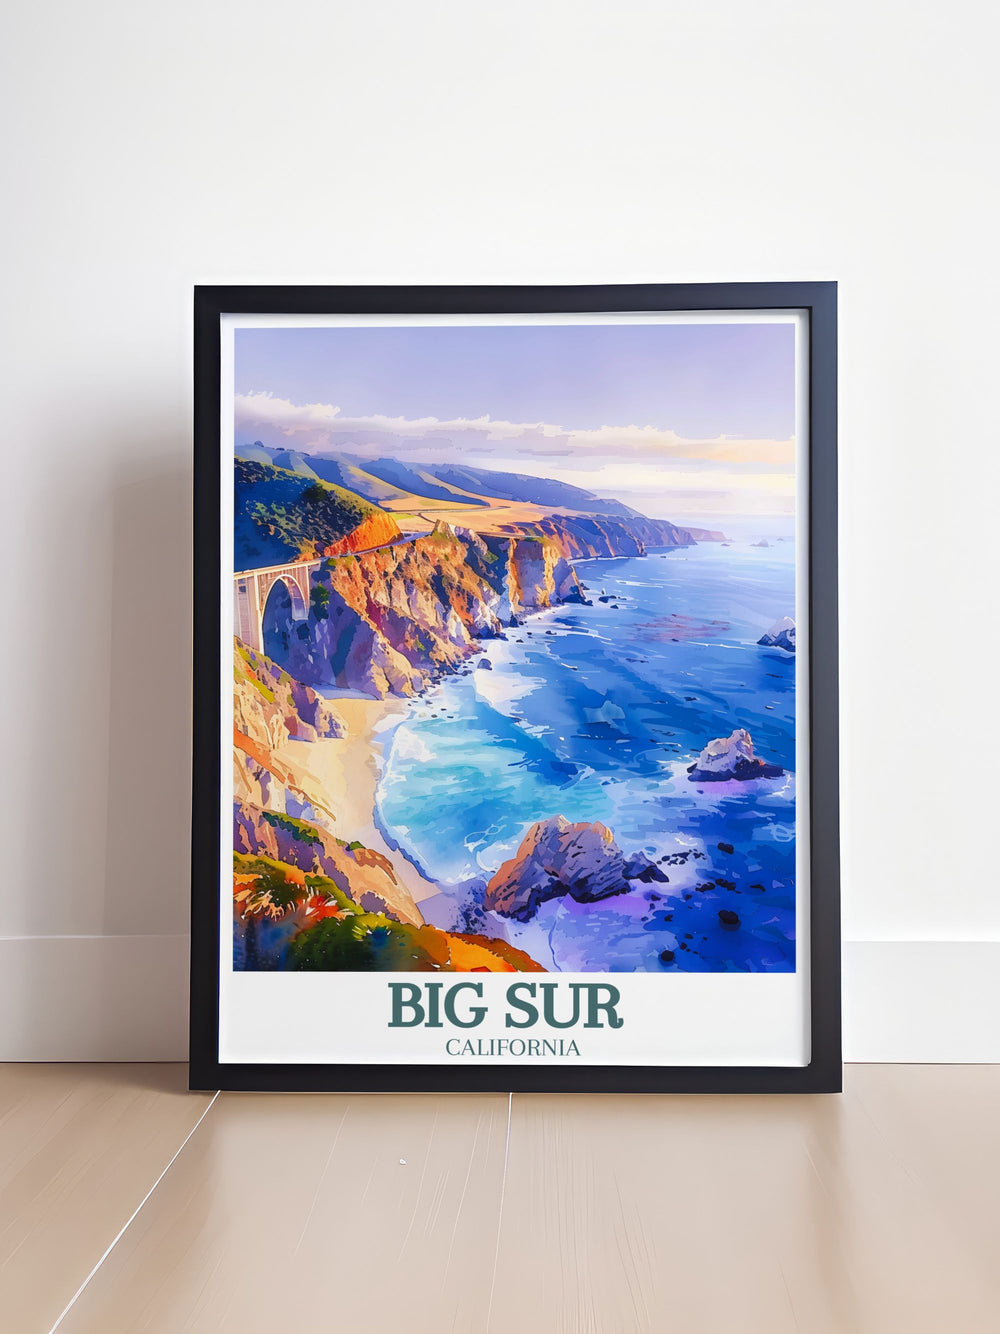 Showcasing the powerful waves of the Pacific Ocean and the historic Bixby Creek Bridge, this art print highlights one of Californias most treasured coastal landmarks, perfect for adventure seekers and nature lovers.